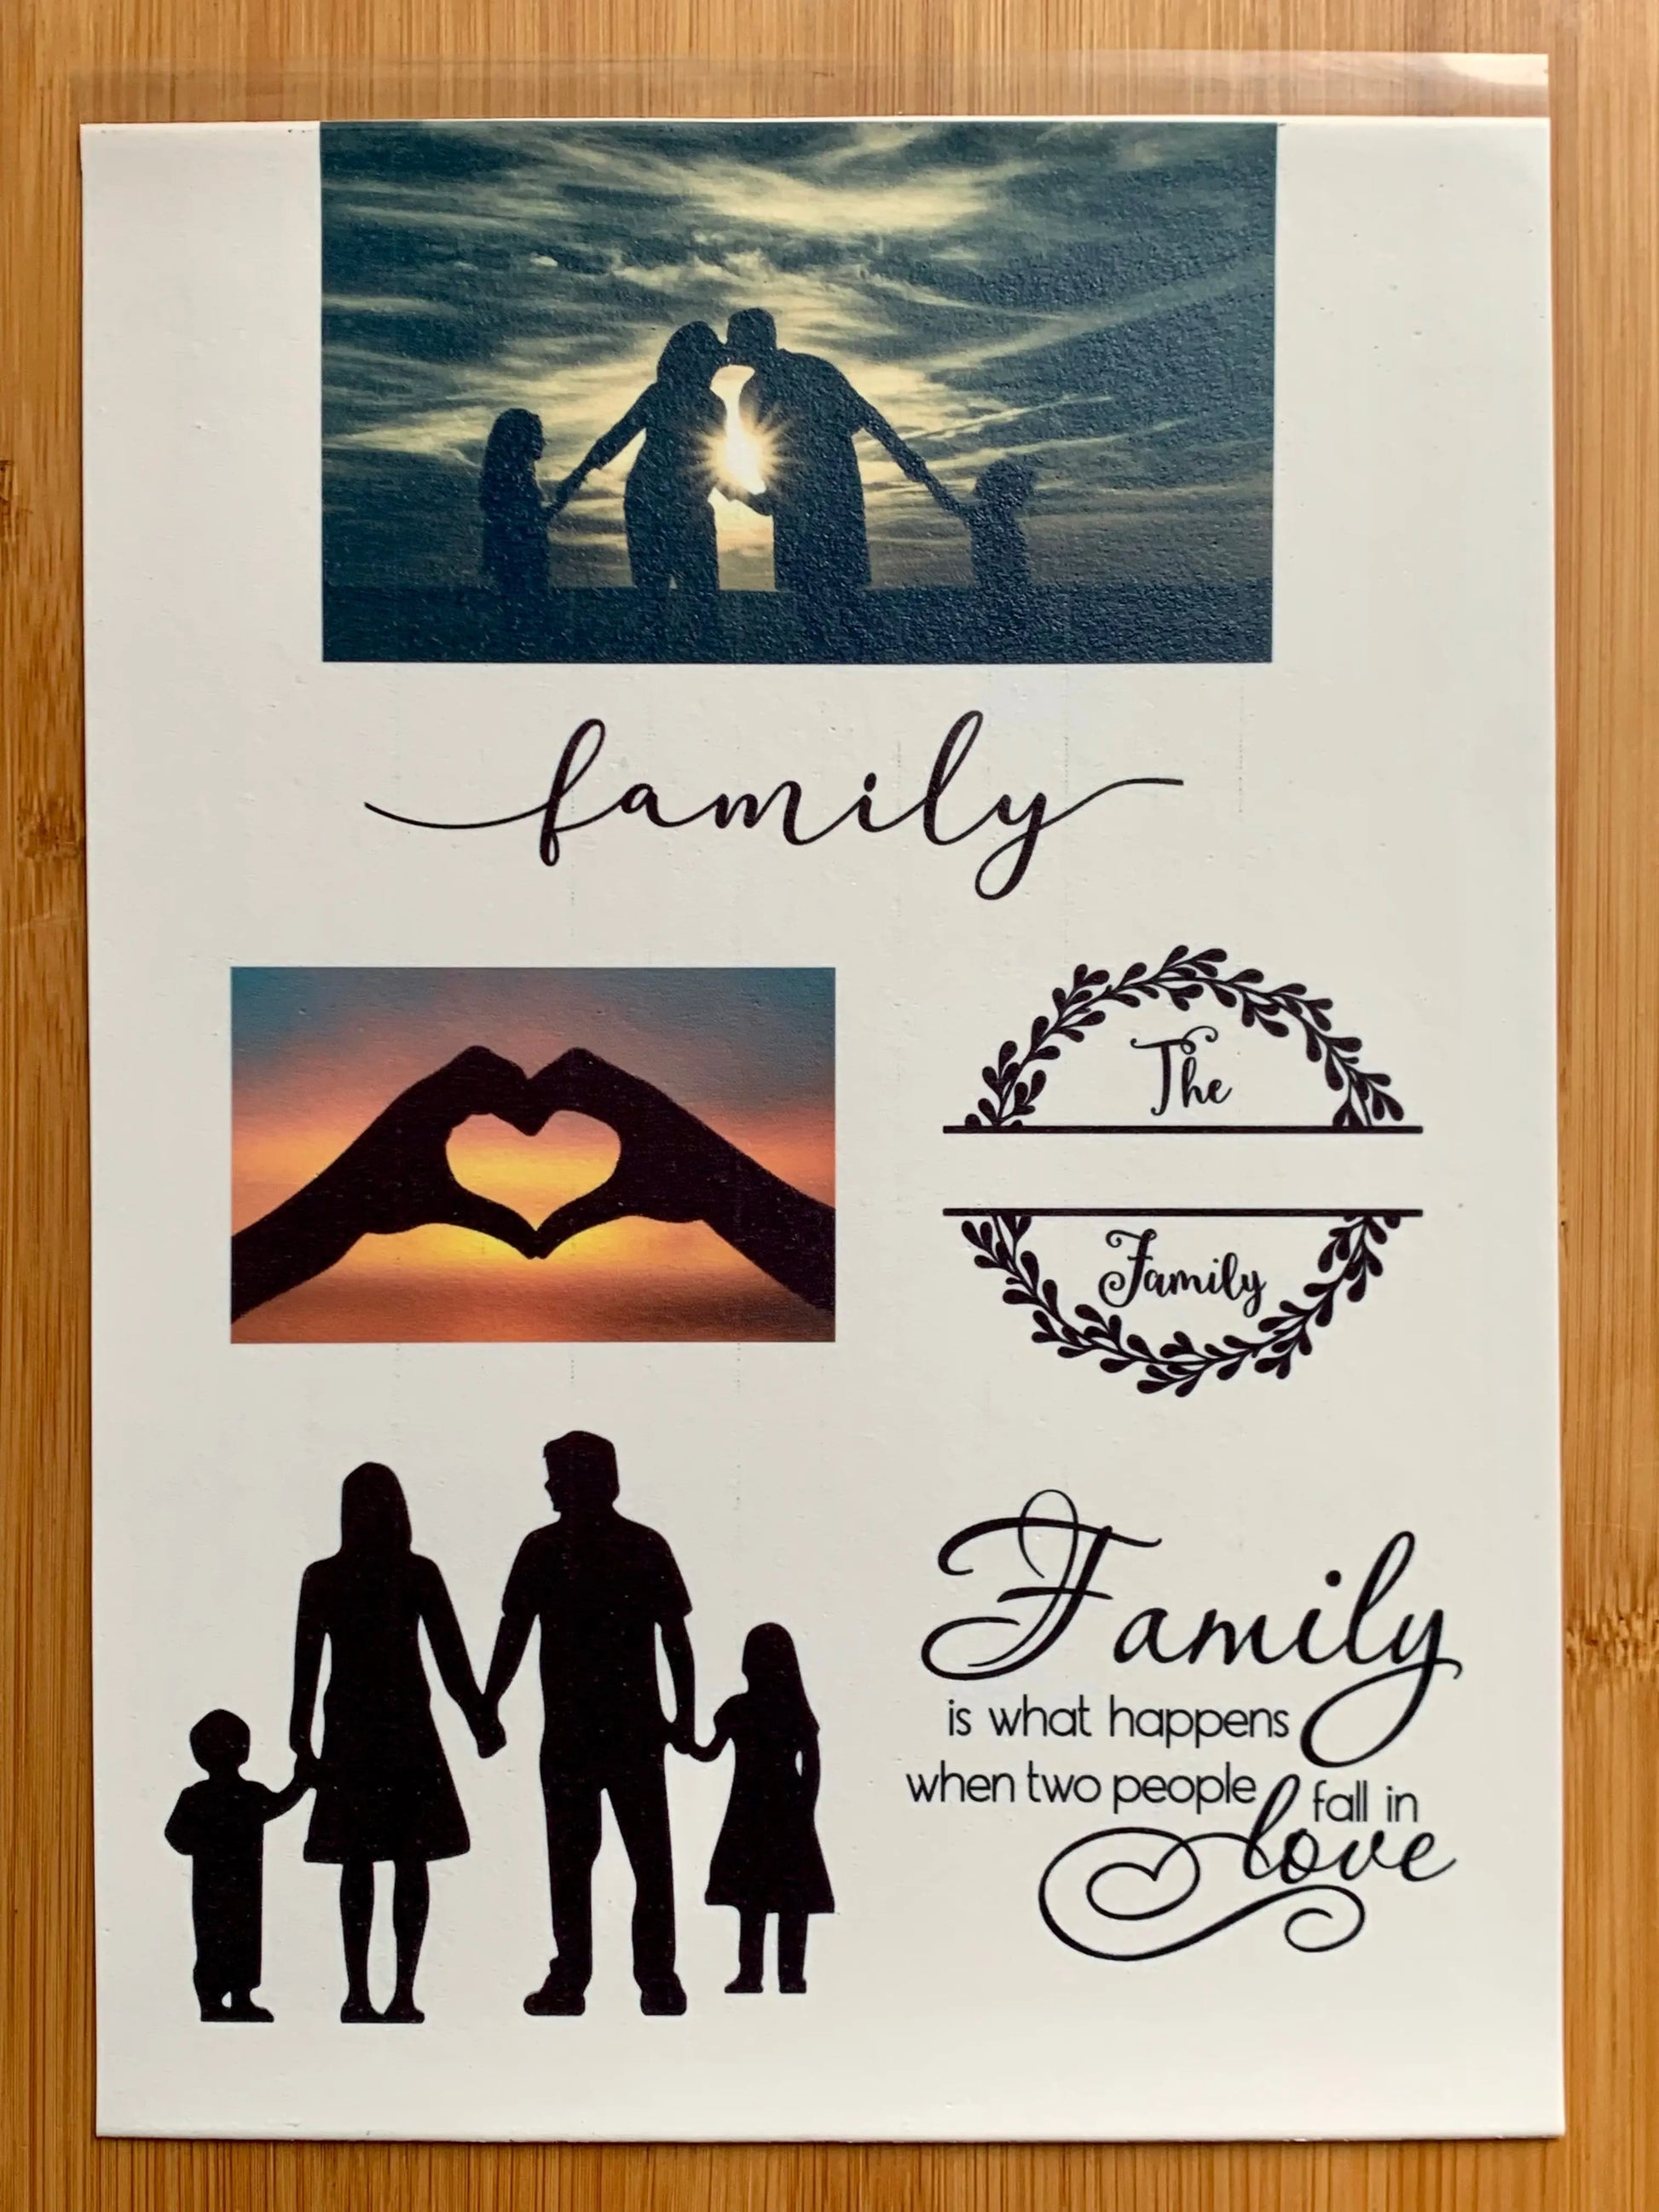 Family - Edible icing topper - sheet size 21 cm x 29 cm A4 MEG cookie cutters